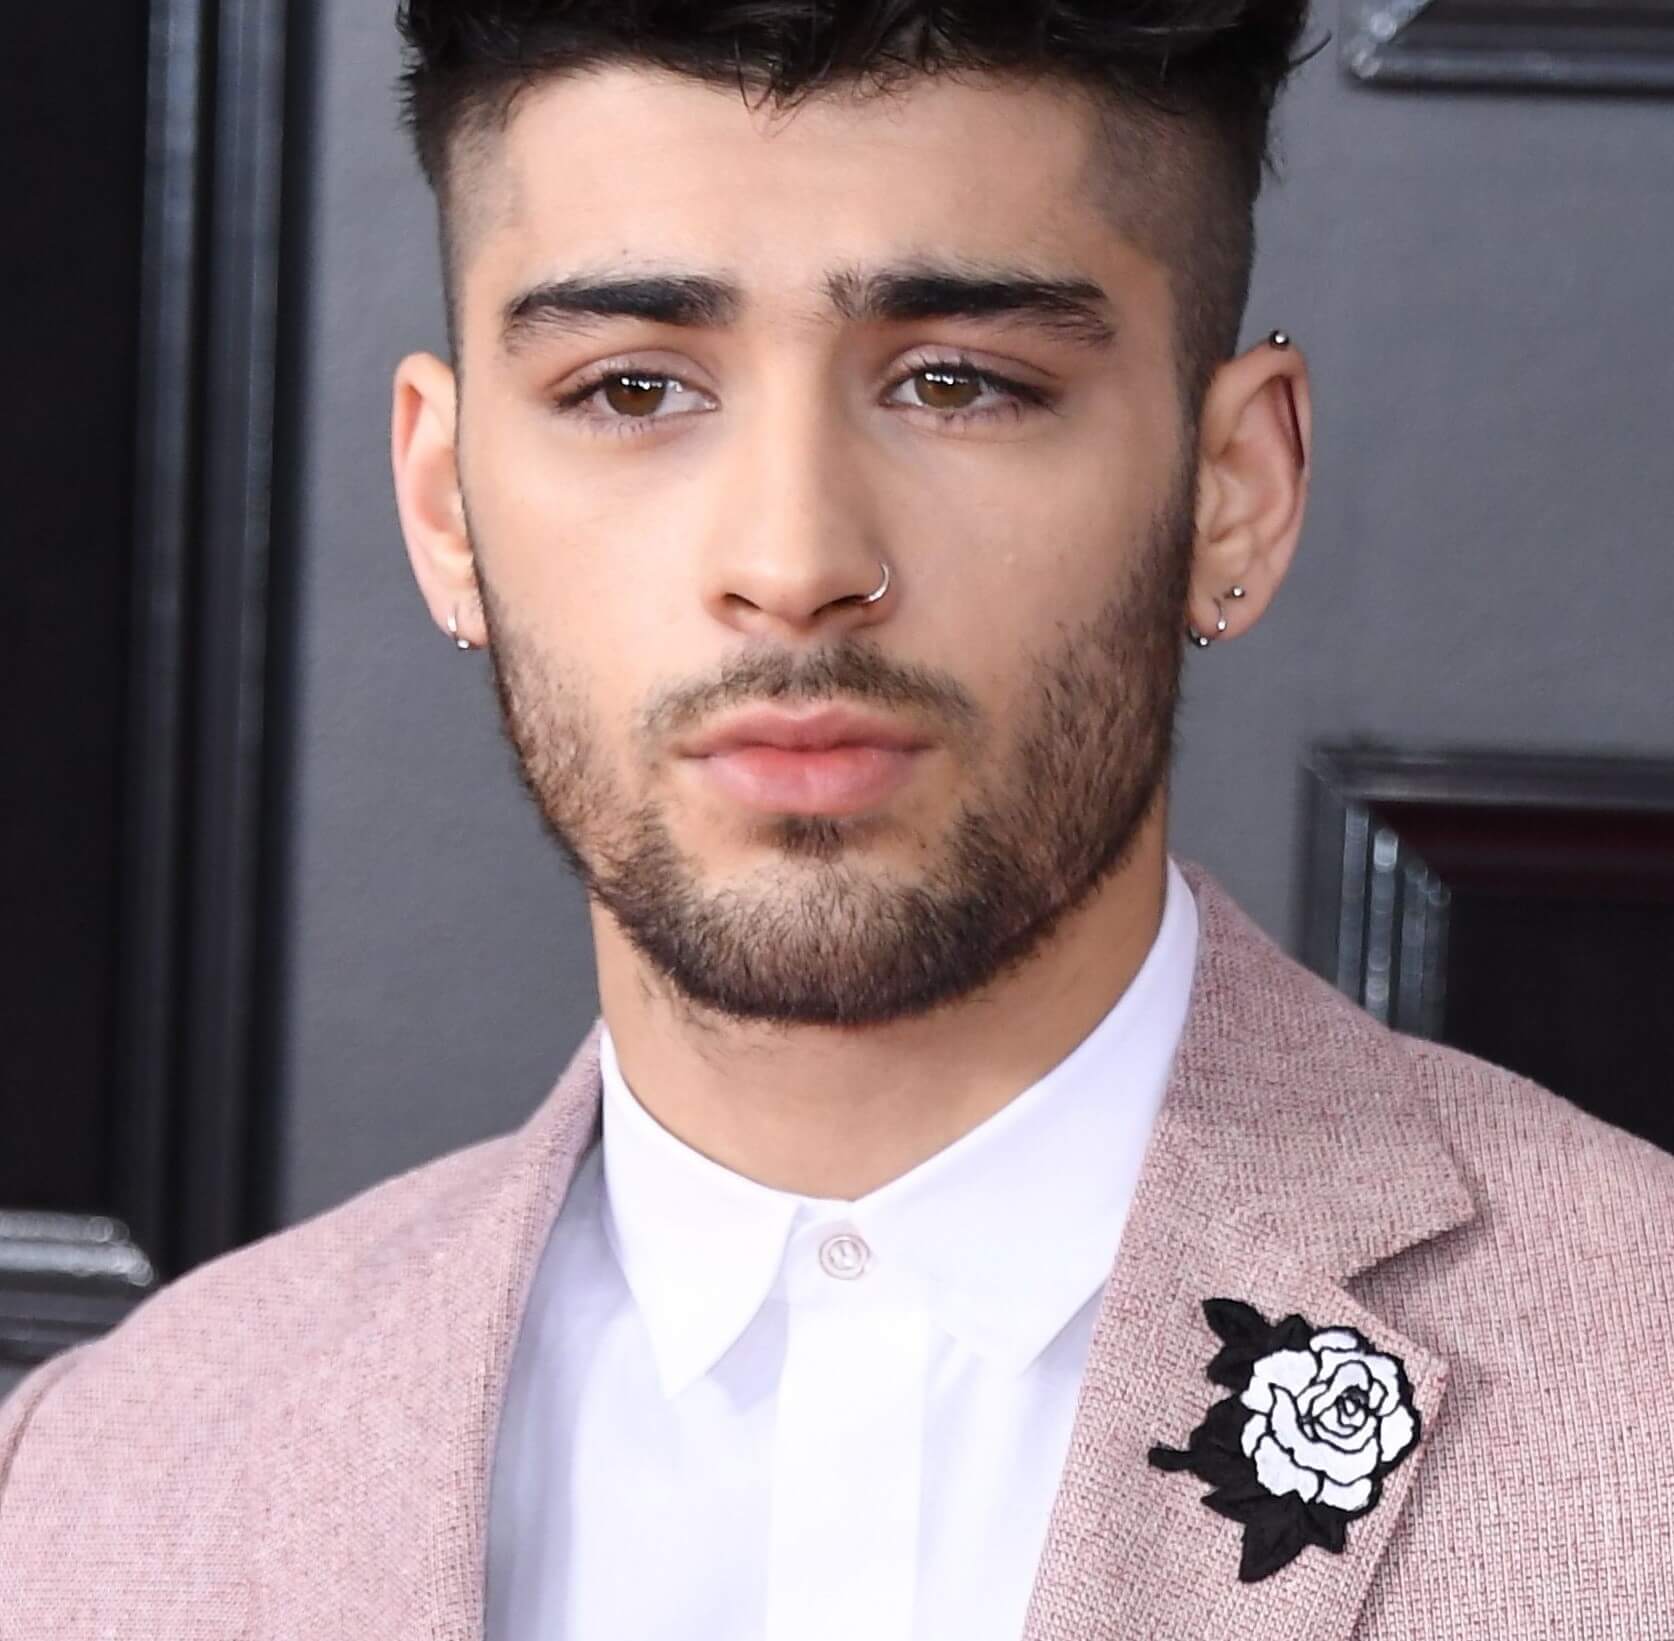 'Room Under the Stairs' singer Zayn Malik in a suit